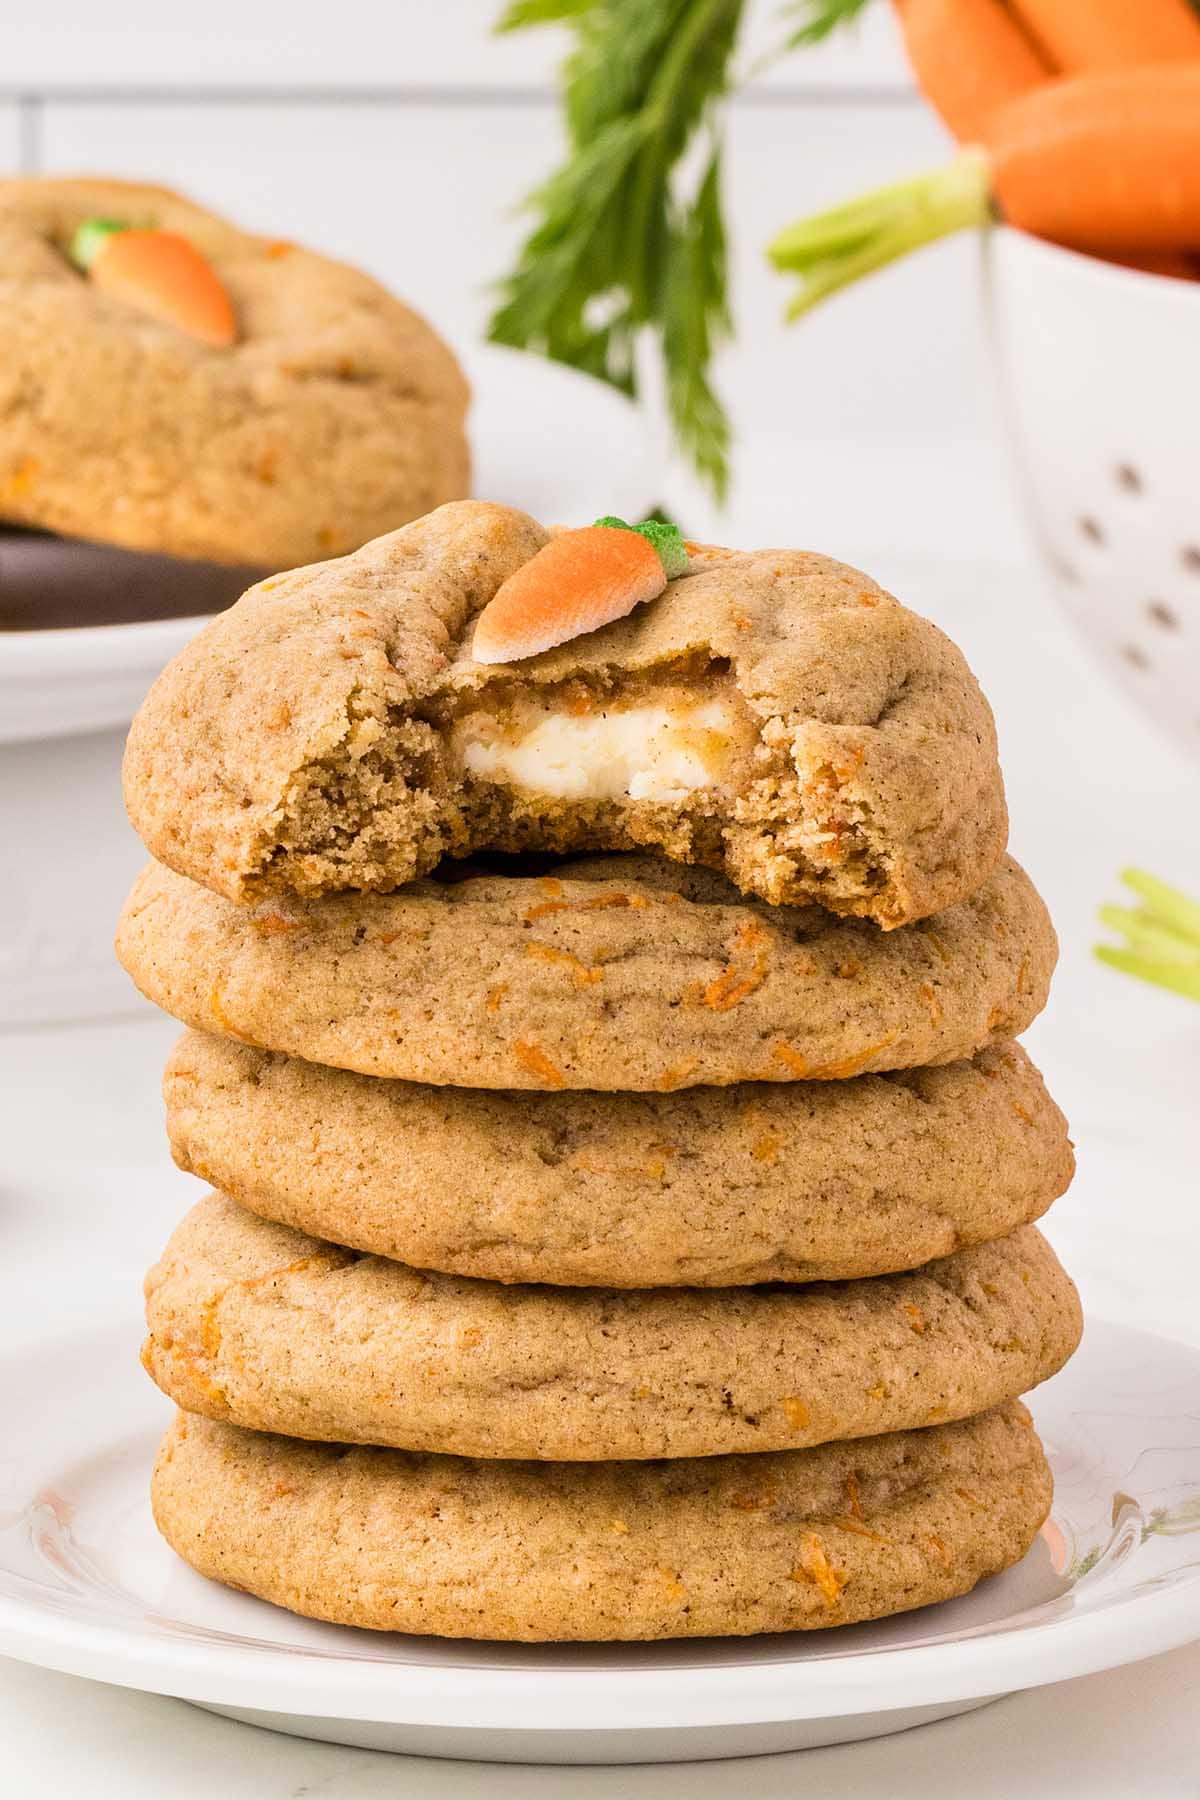 a couple of Carrot Cake Stuffed Cookies with cream cheese filling.